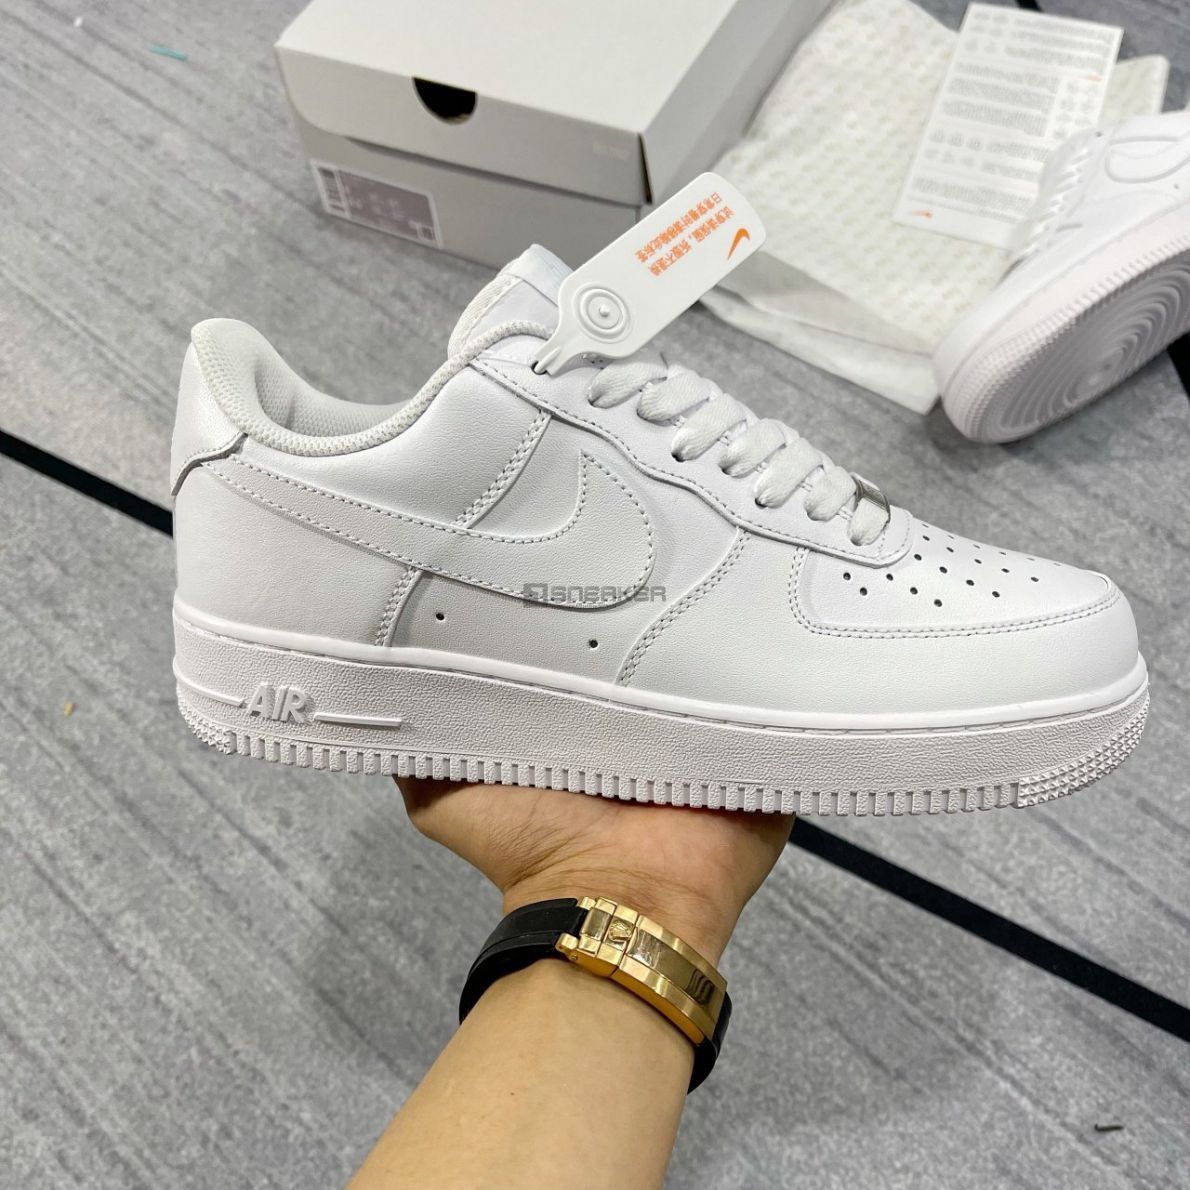 giay nike air Force 1 aF1 all white trang rep 1 1 9